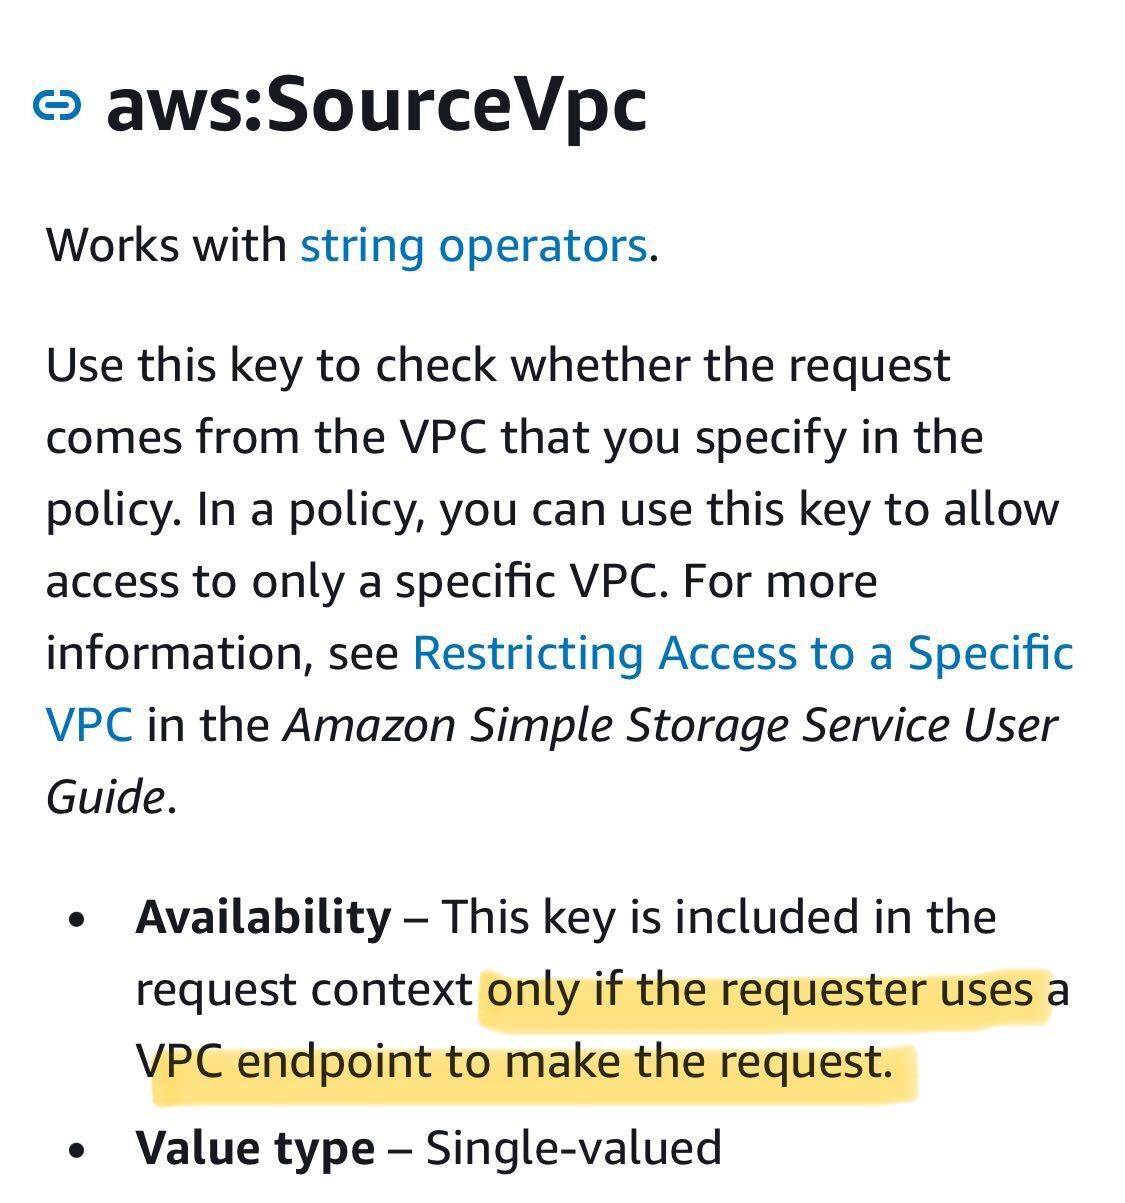 The documentation states that VPC endpoint is required, but the story doens't stop here